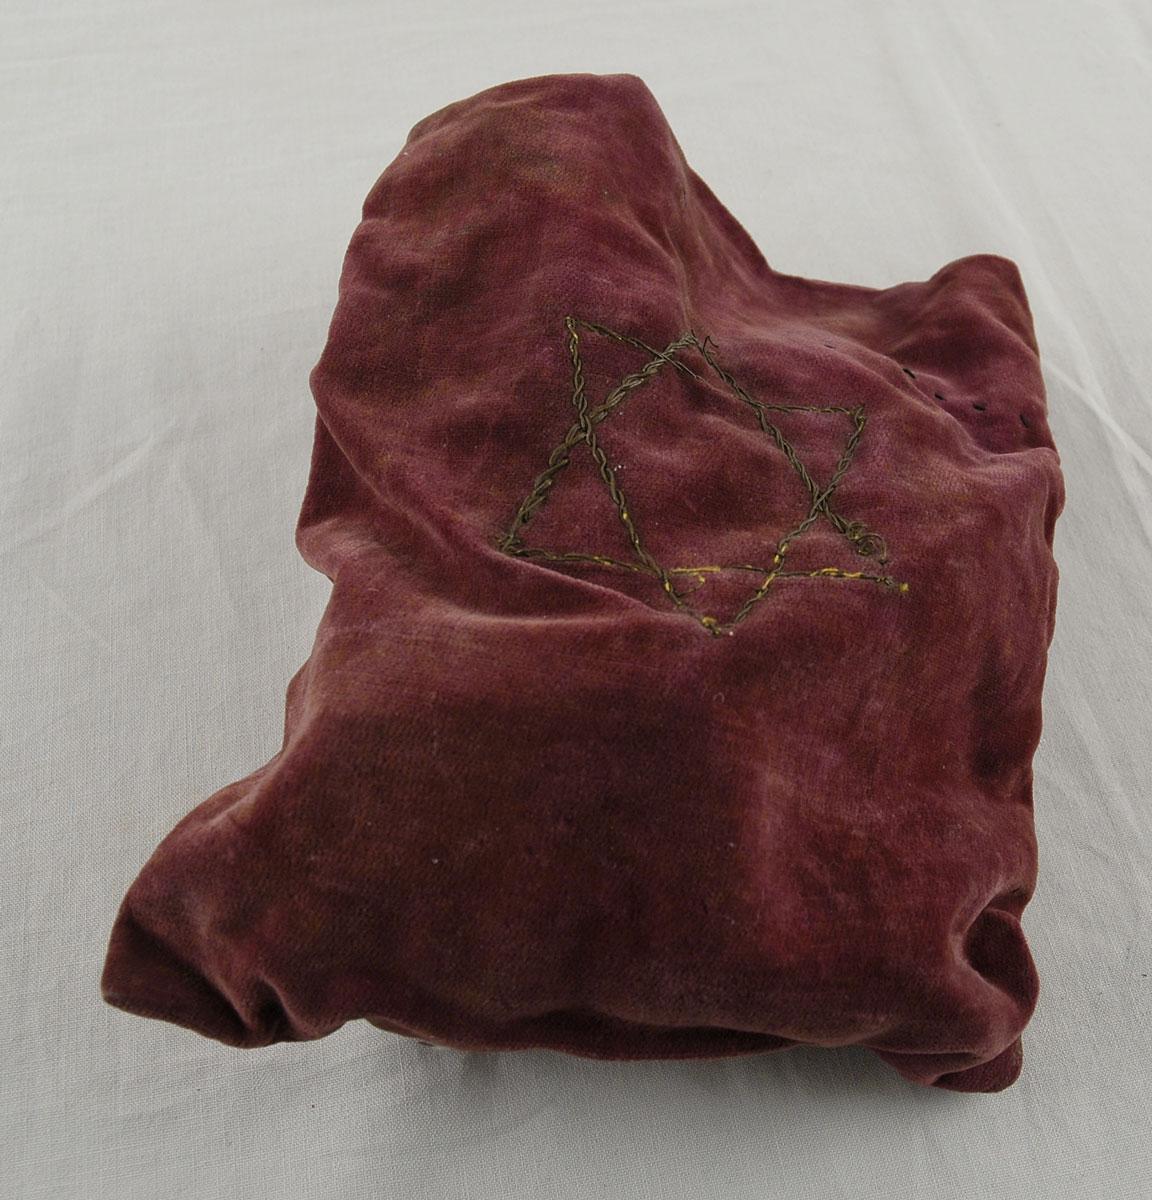 The bag that Zvi Nojman kept his Tefillin (phylacteries) in during the war, and throughout his life in Israel